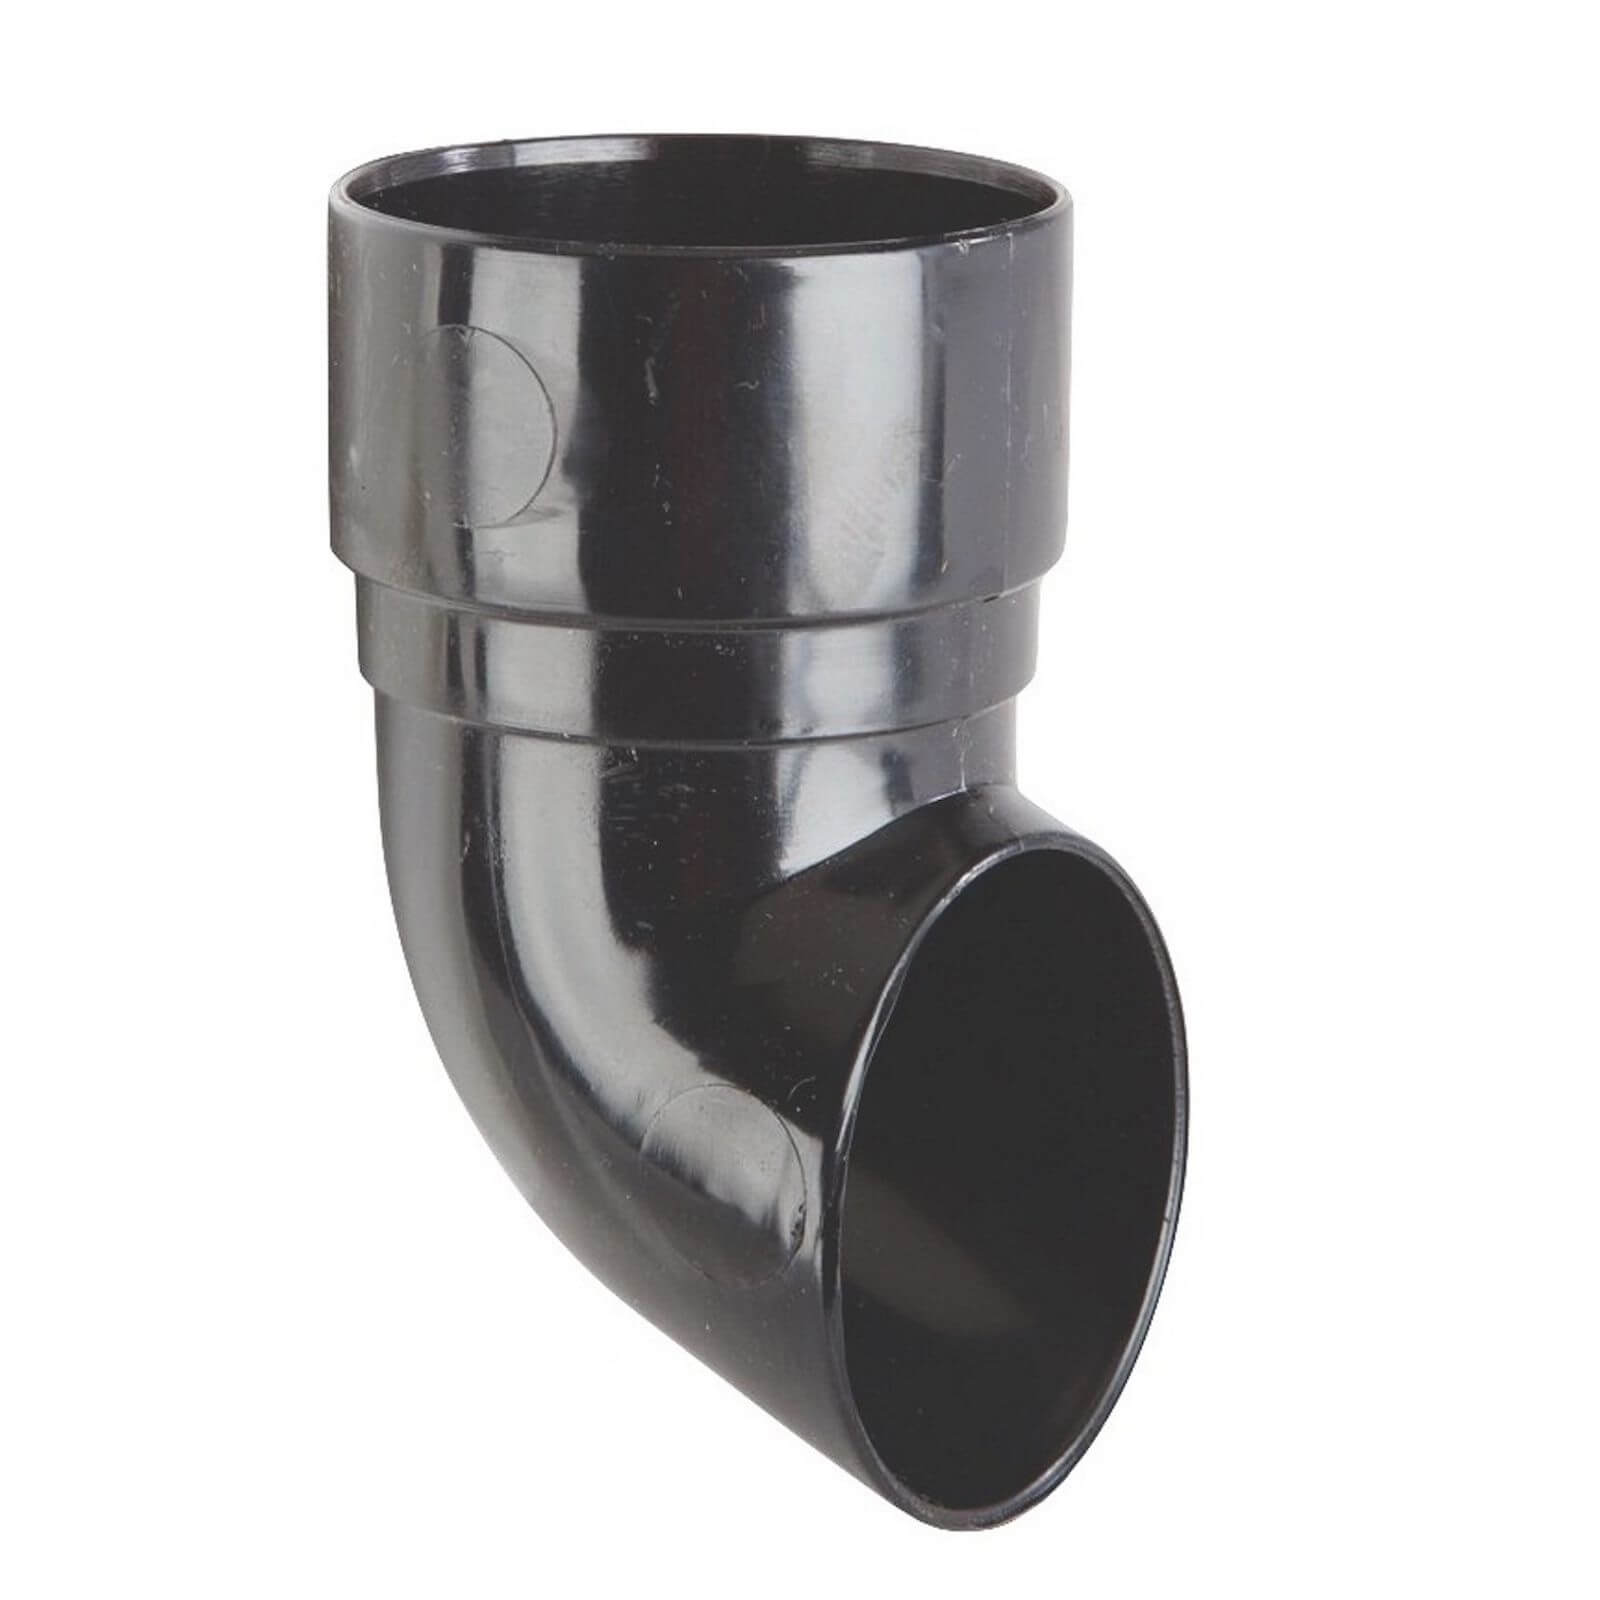 Polypipe Round Downpipe Shoe - 50mm - Black